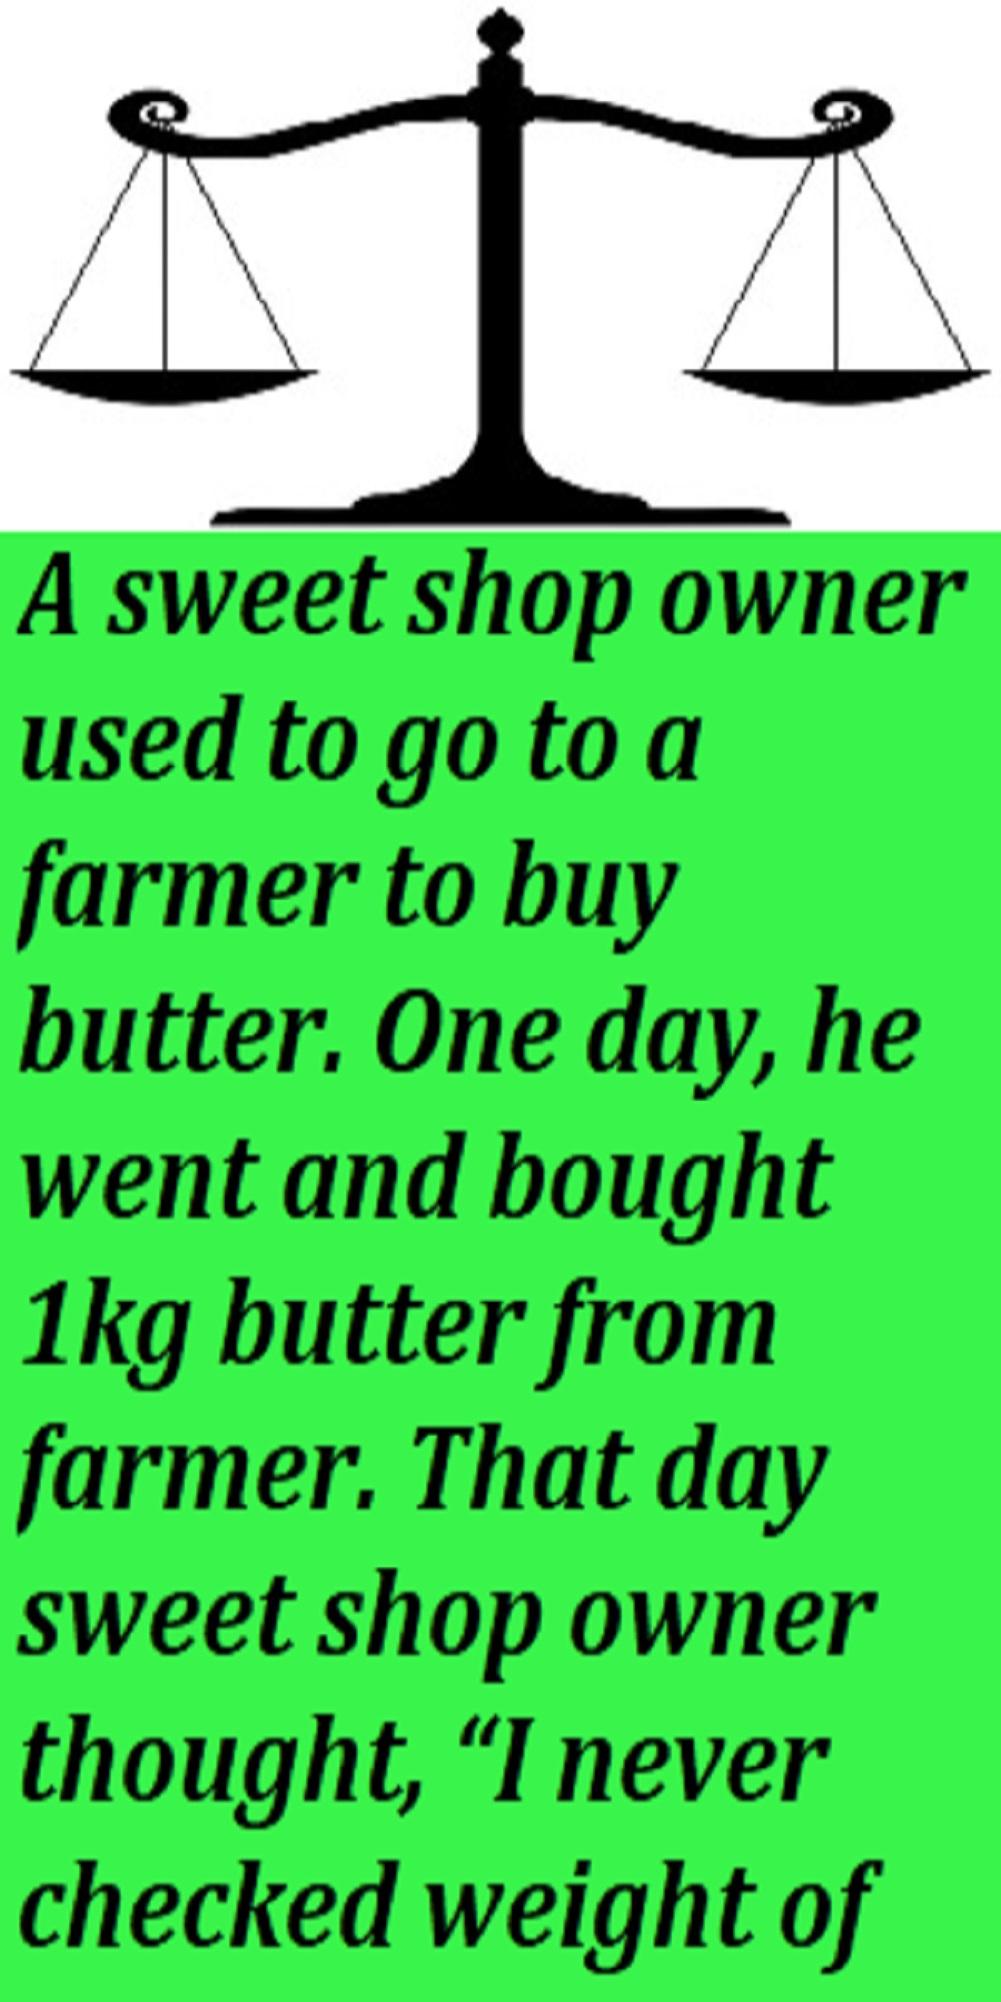 Sweet Shop Owner Complain 2 - Story